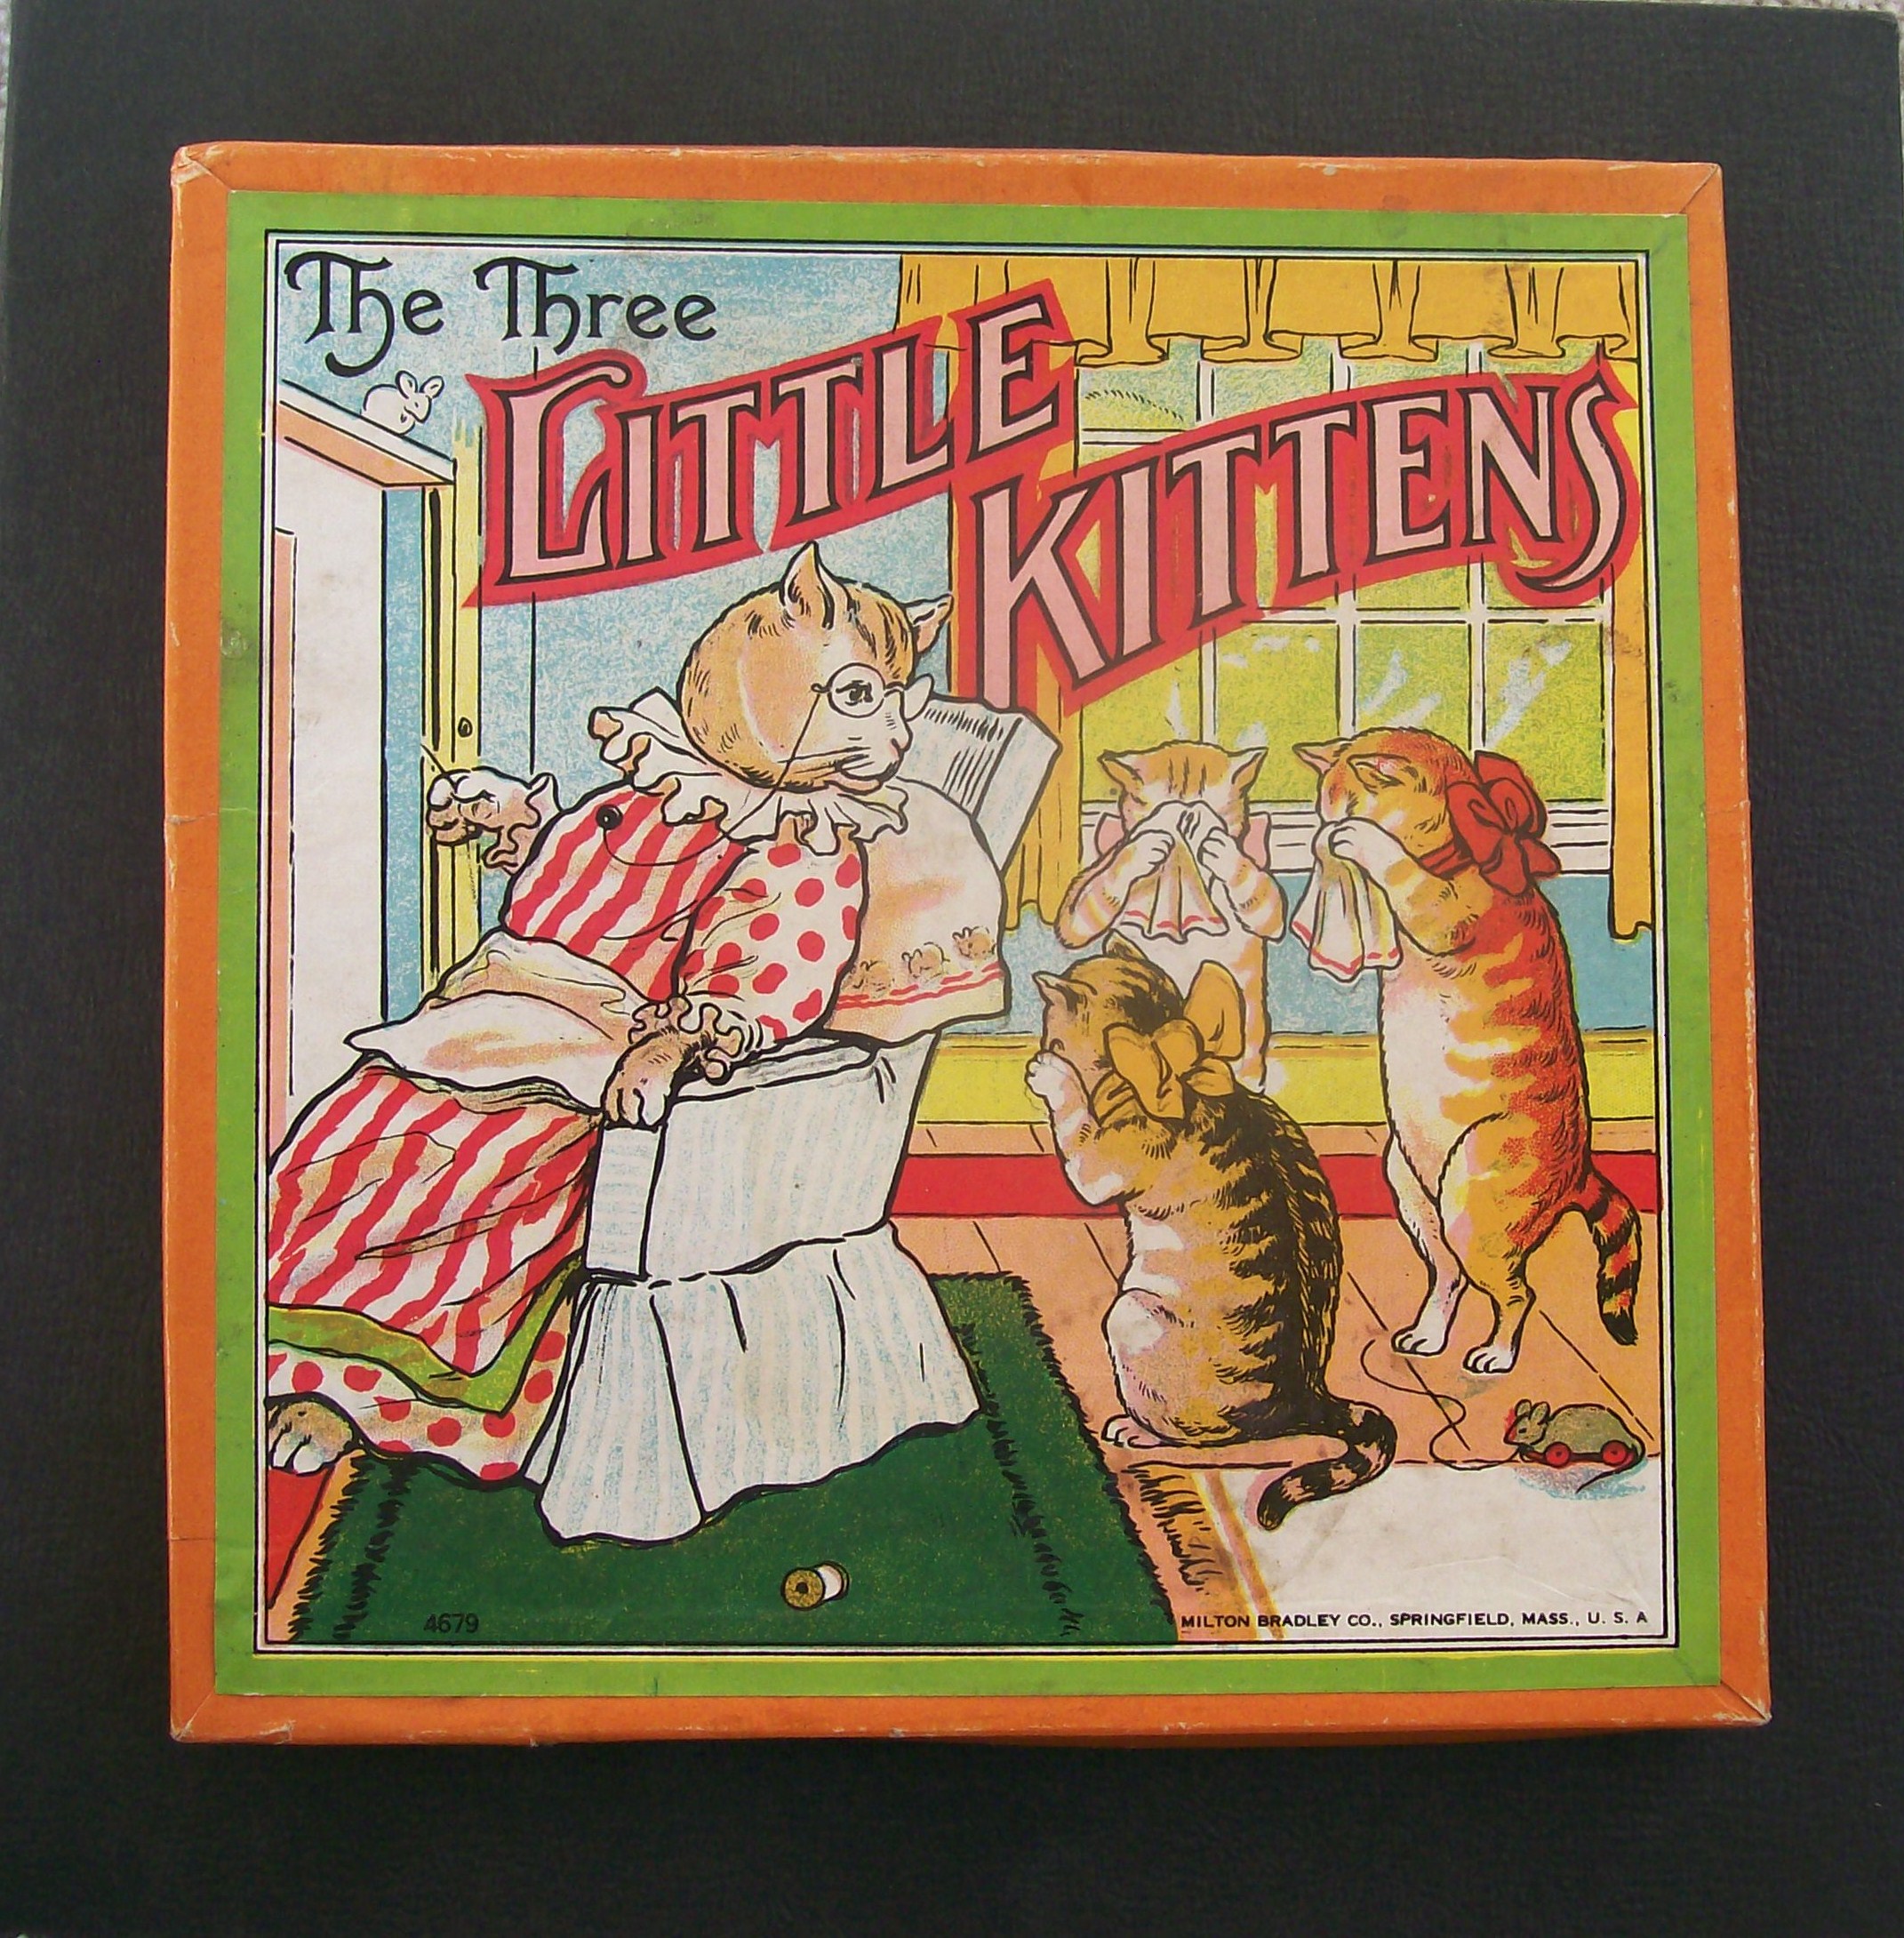 Old Board Game of The Three Little Kittens